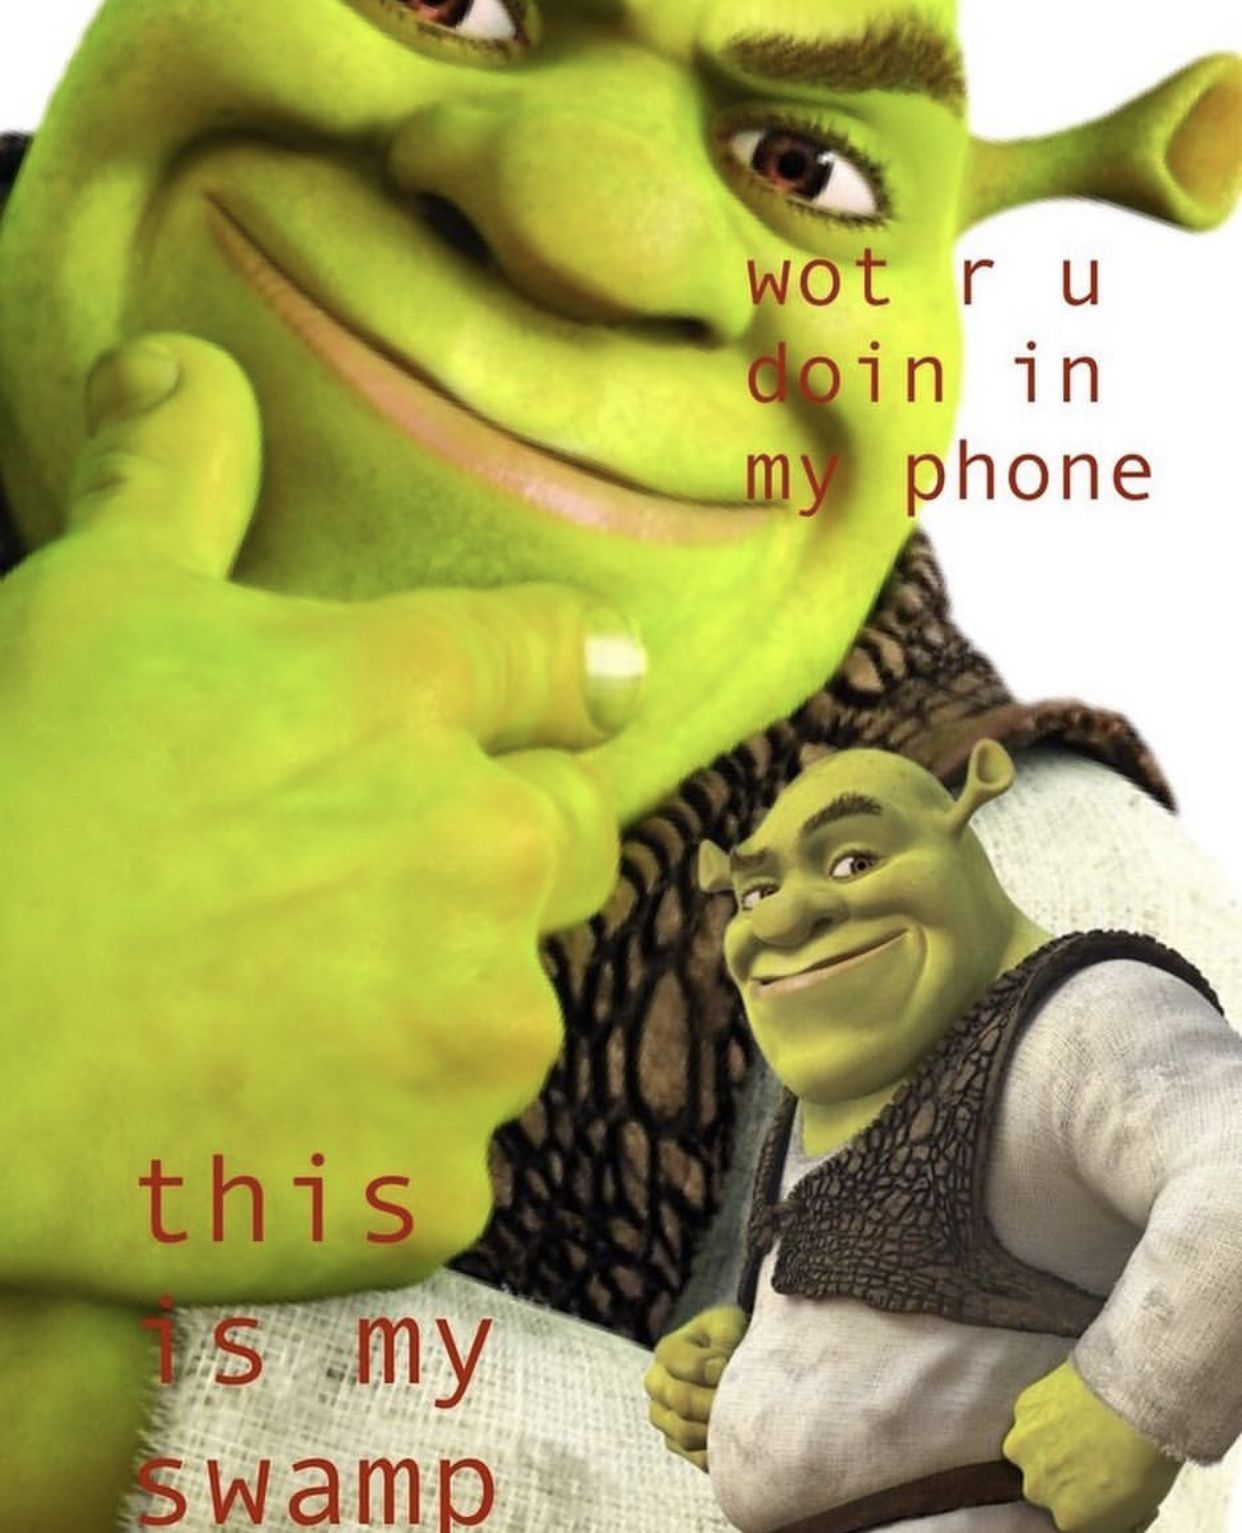 Shrek Funny Pictures Wallpapers